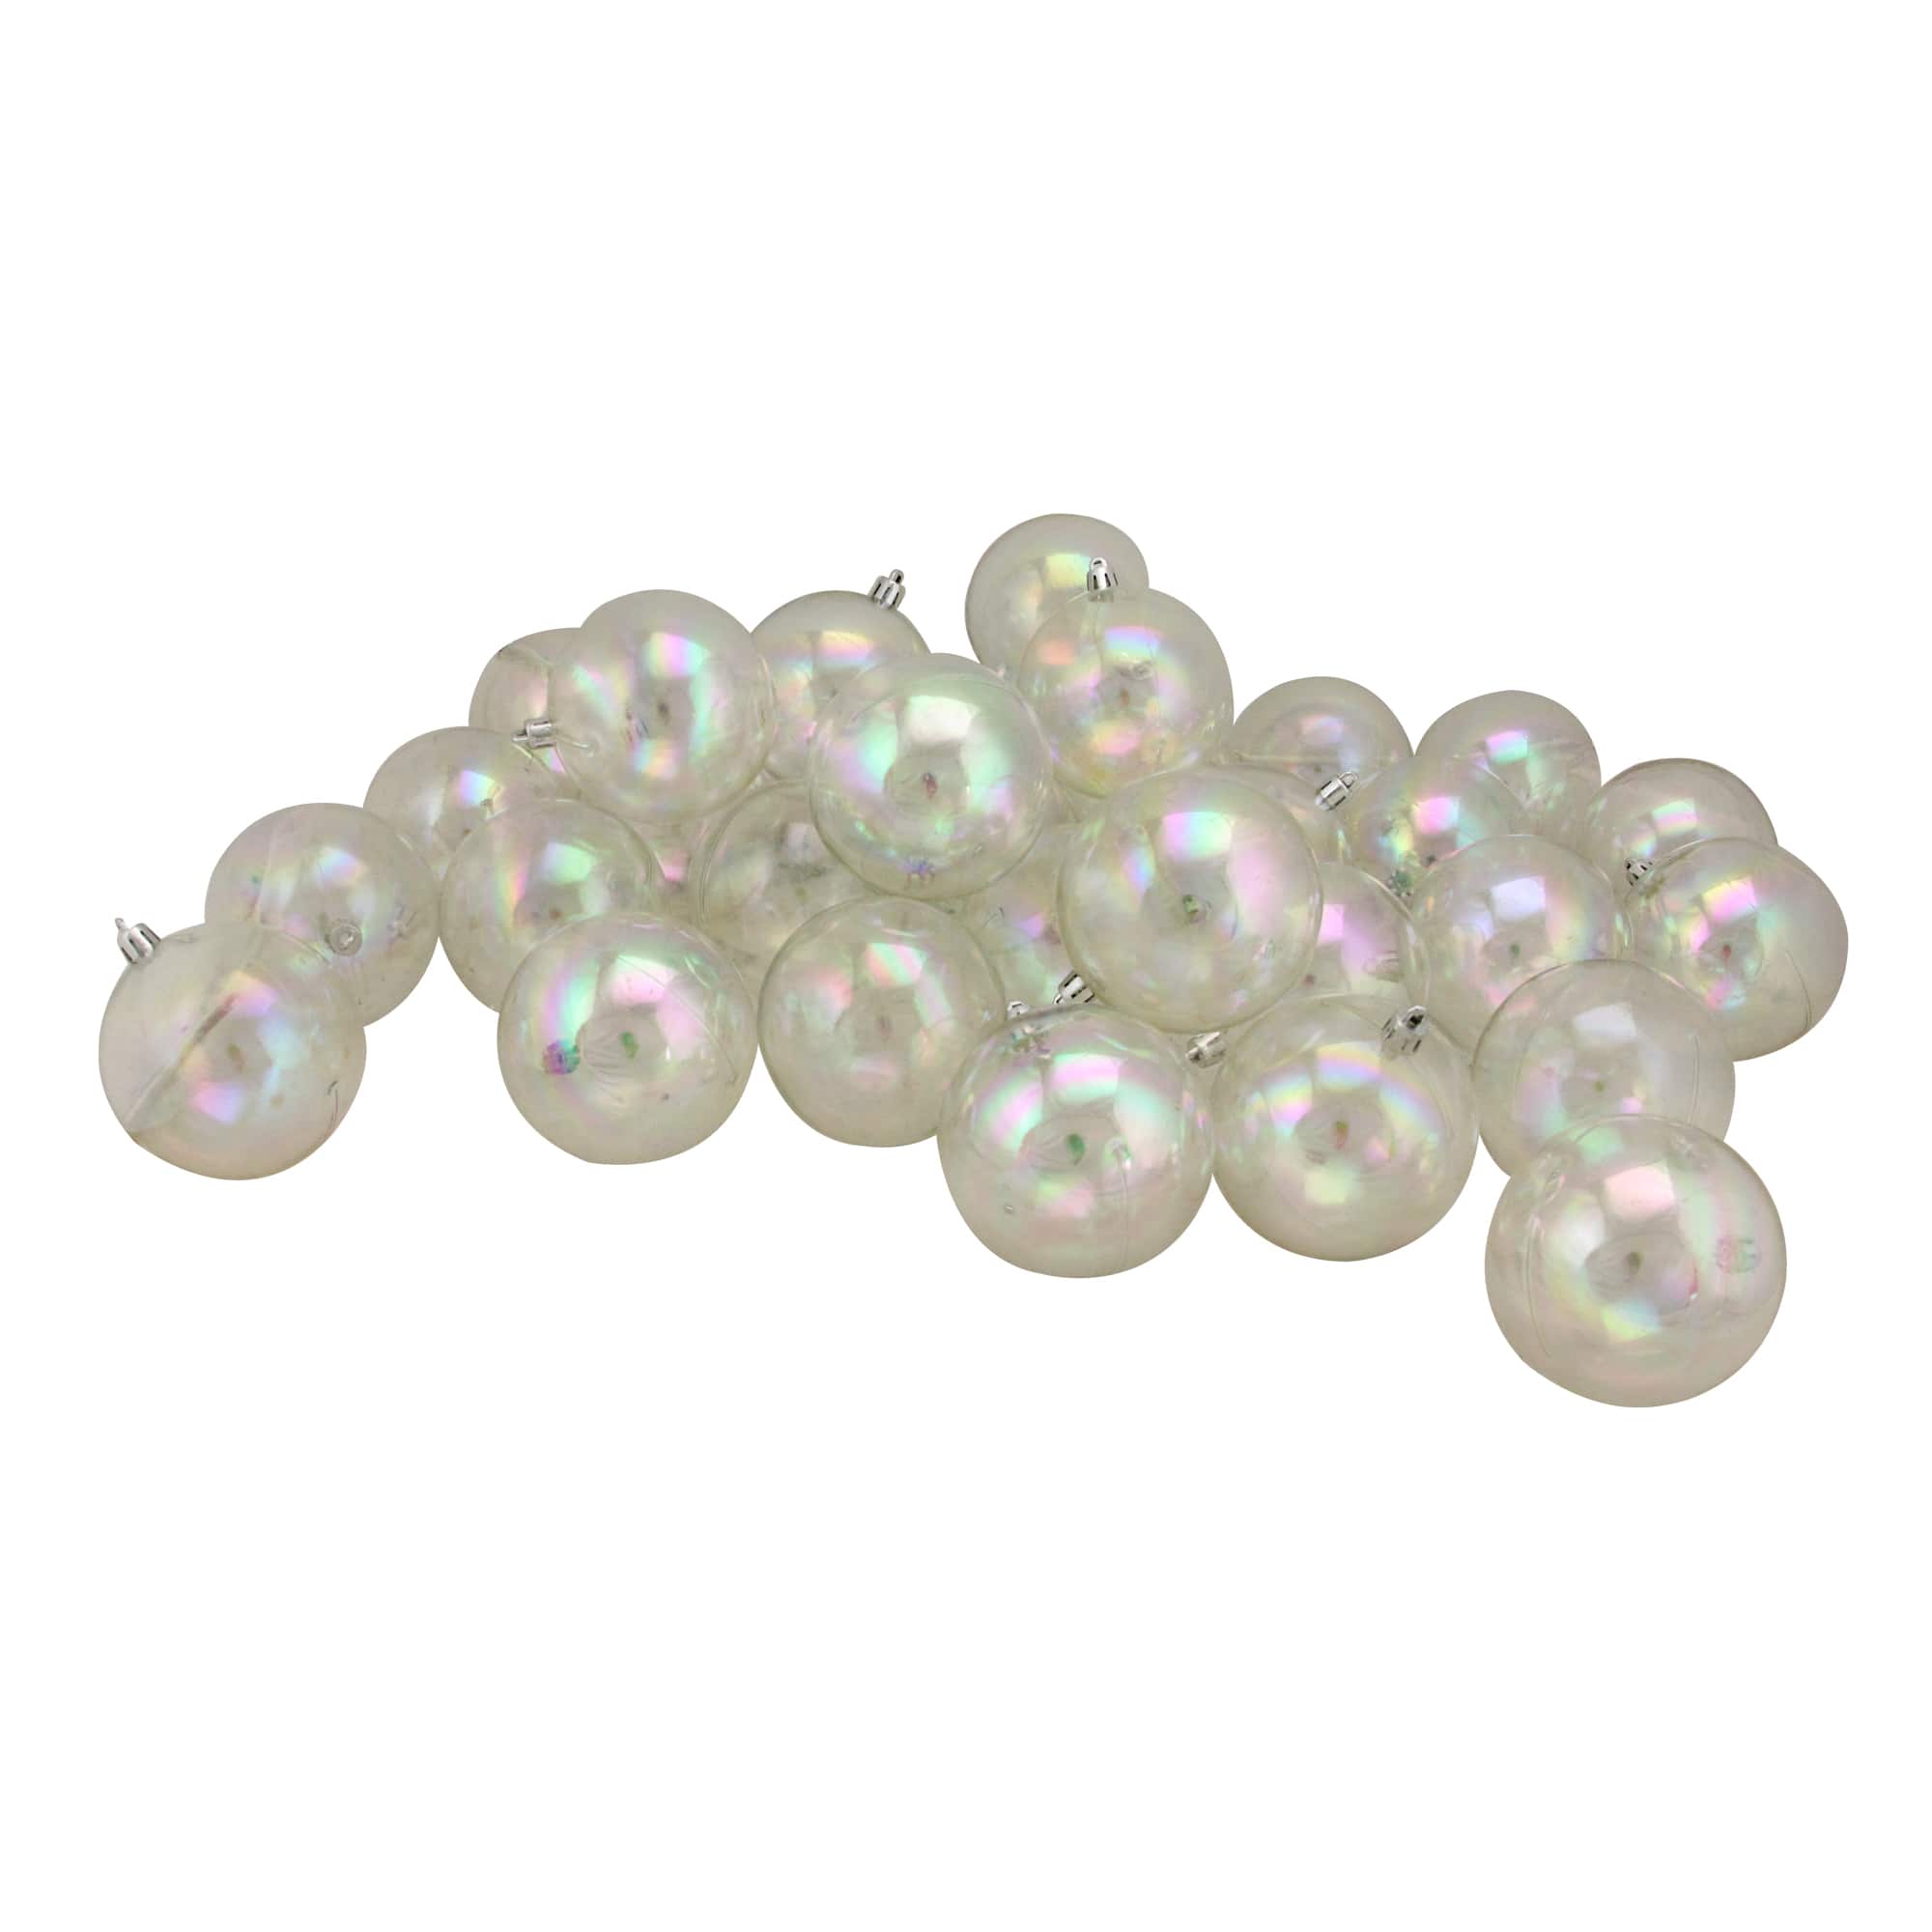 32ct. 3.5 Clear Iridescent Shatterproof Shiny Christmas Ball Ornaments